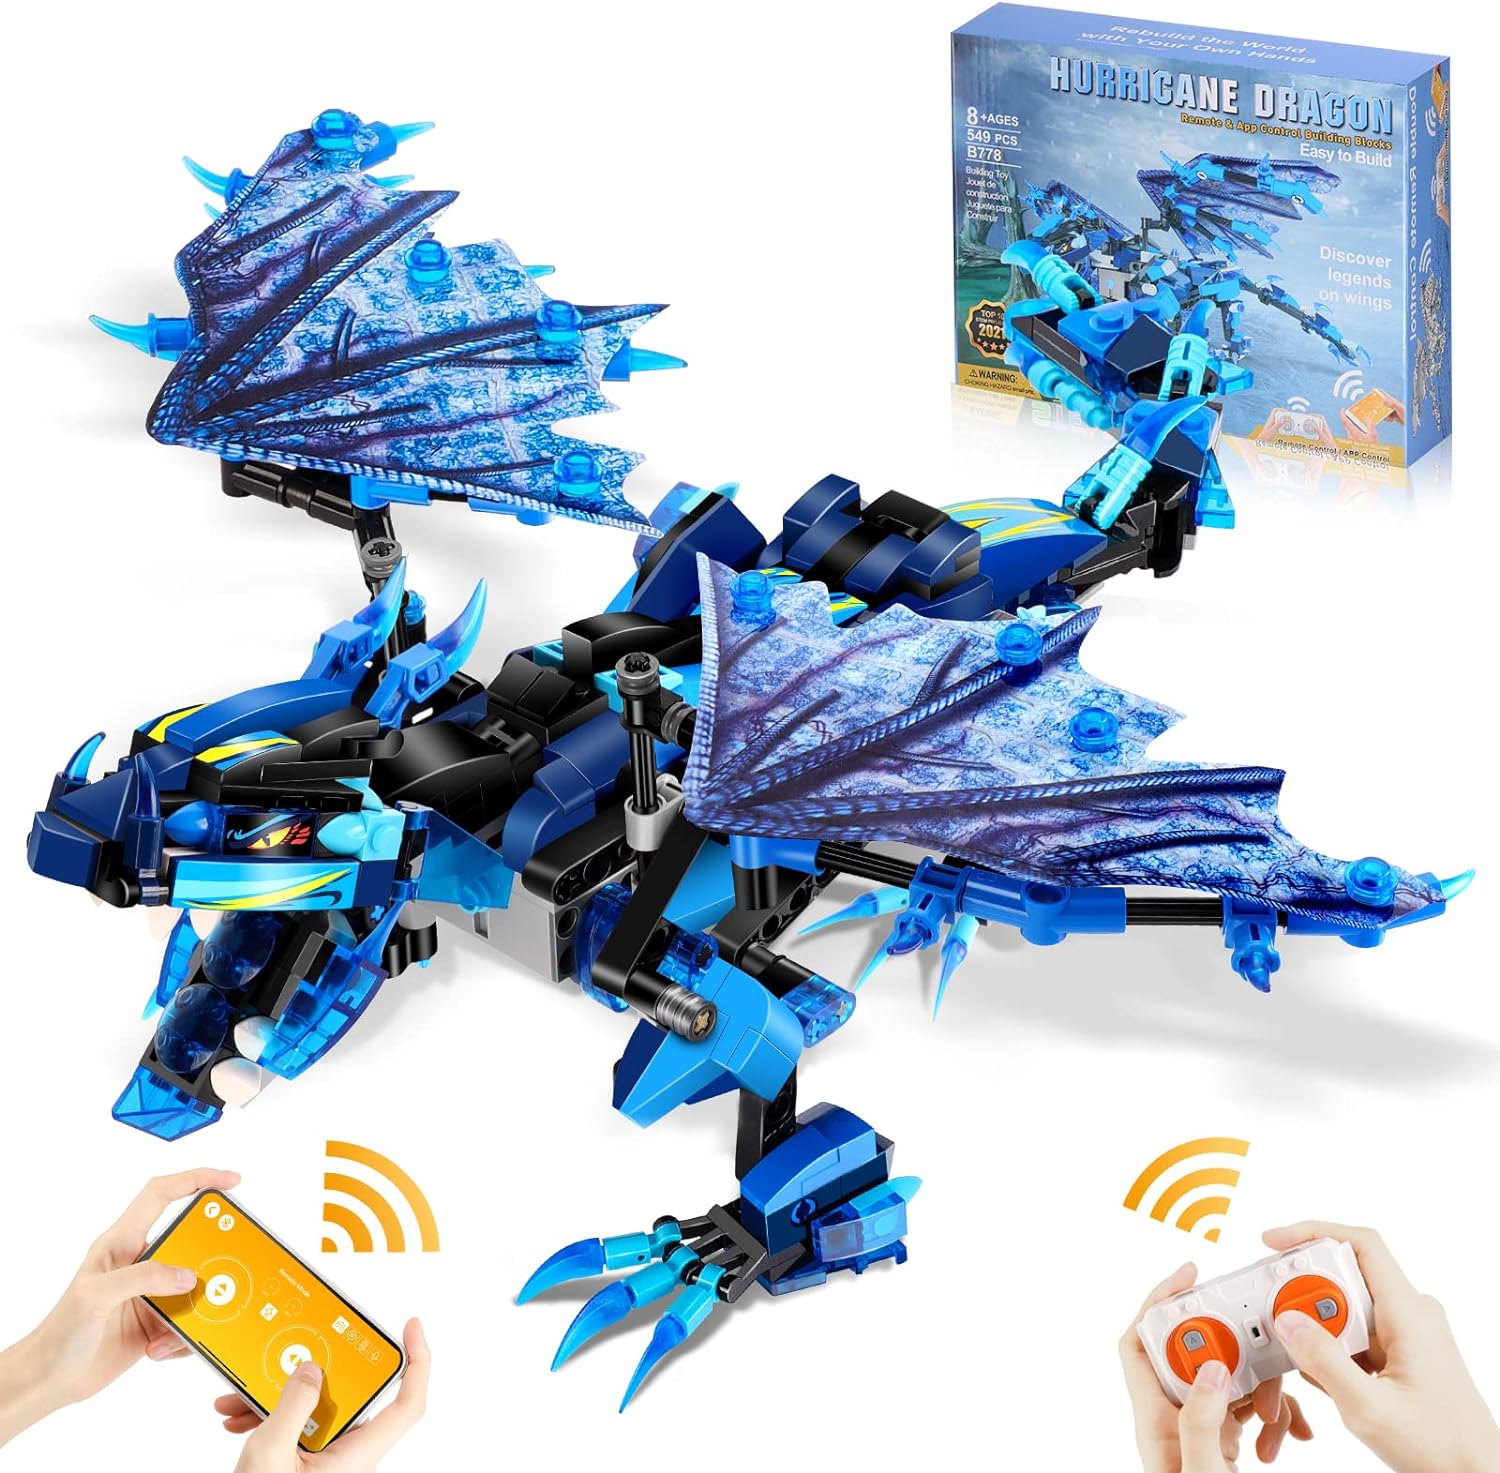 Sillbird Hurricane Dragon Building Kit, Remote & APP Controlled STEM Projects for Kids Age 8-12 Toys Gifts for Boys Girls Age 7 8 9 10 11 12 14-16, New 2022 (549 Pieces)